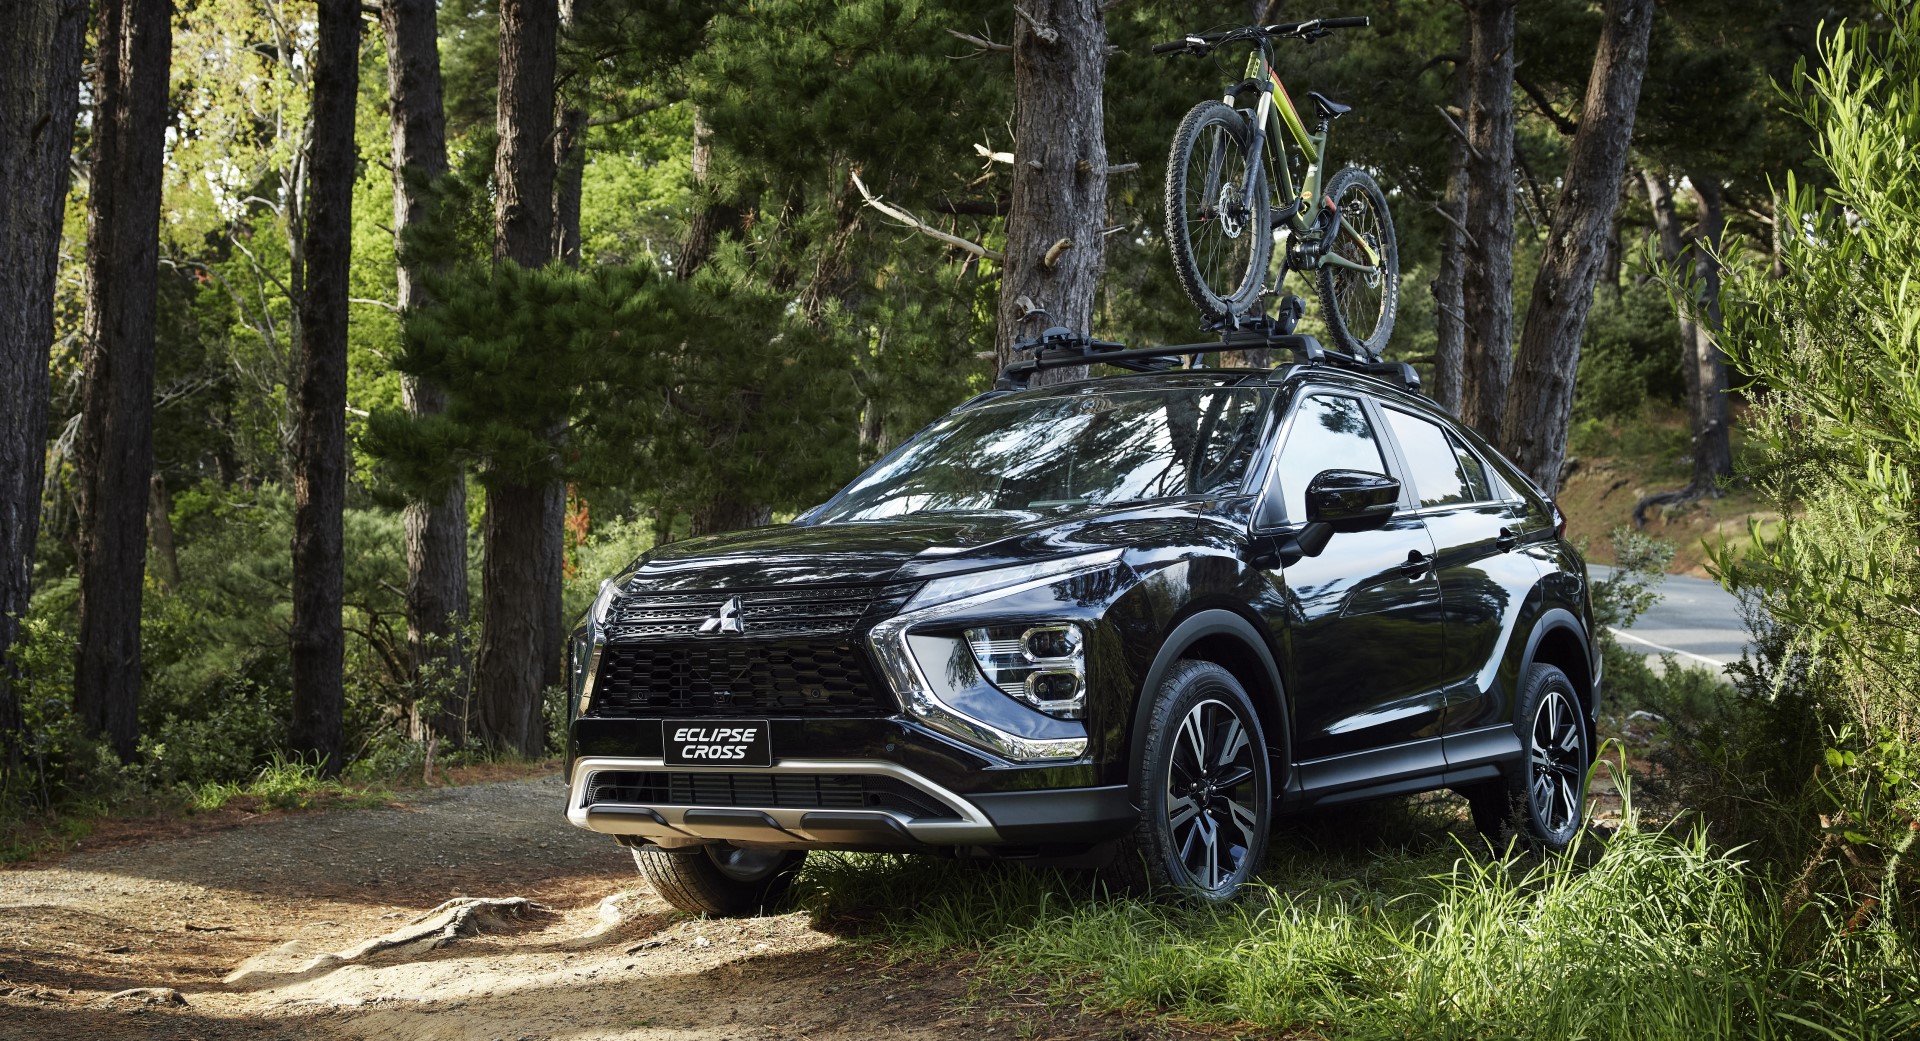 A black Mitsubishi Eclipse Cross with a mountain bike on top of its roof racks parked in a forest